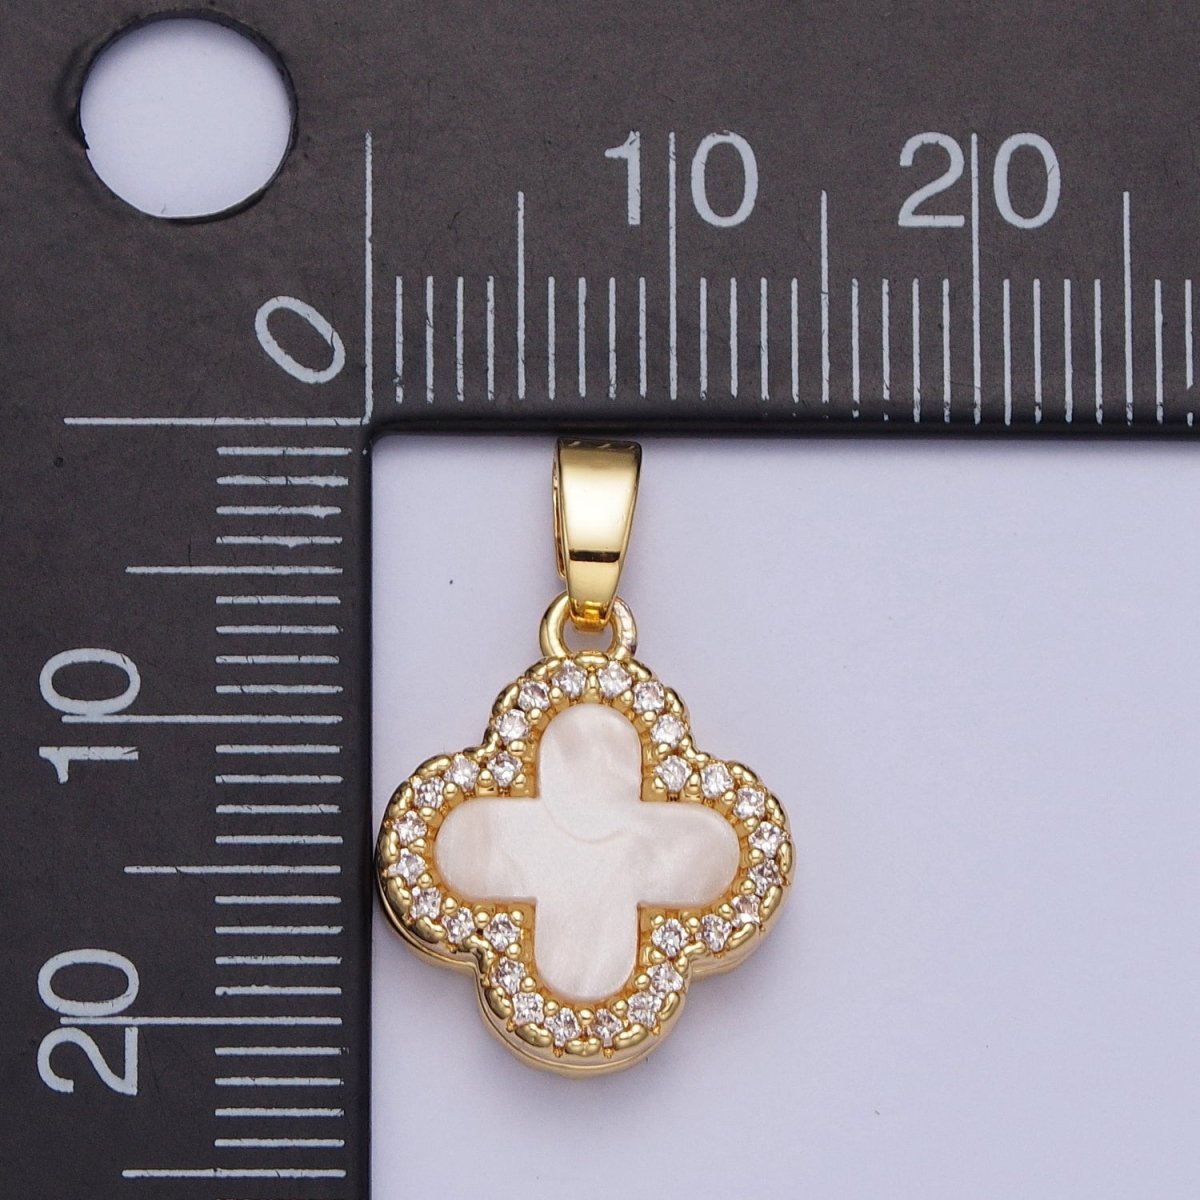 Double Sided Black and White Quatrefoil Lucky Four Clover Pendant with Micro pave Cubic Zirconia Pendant For DIY Necklace Making | X-521 - DLUXCA